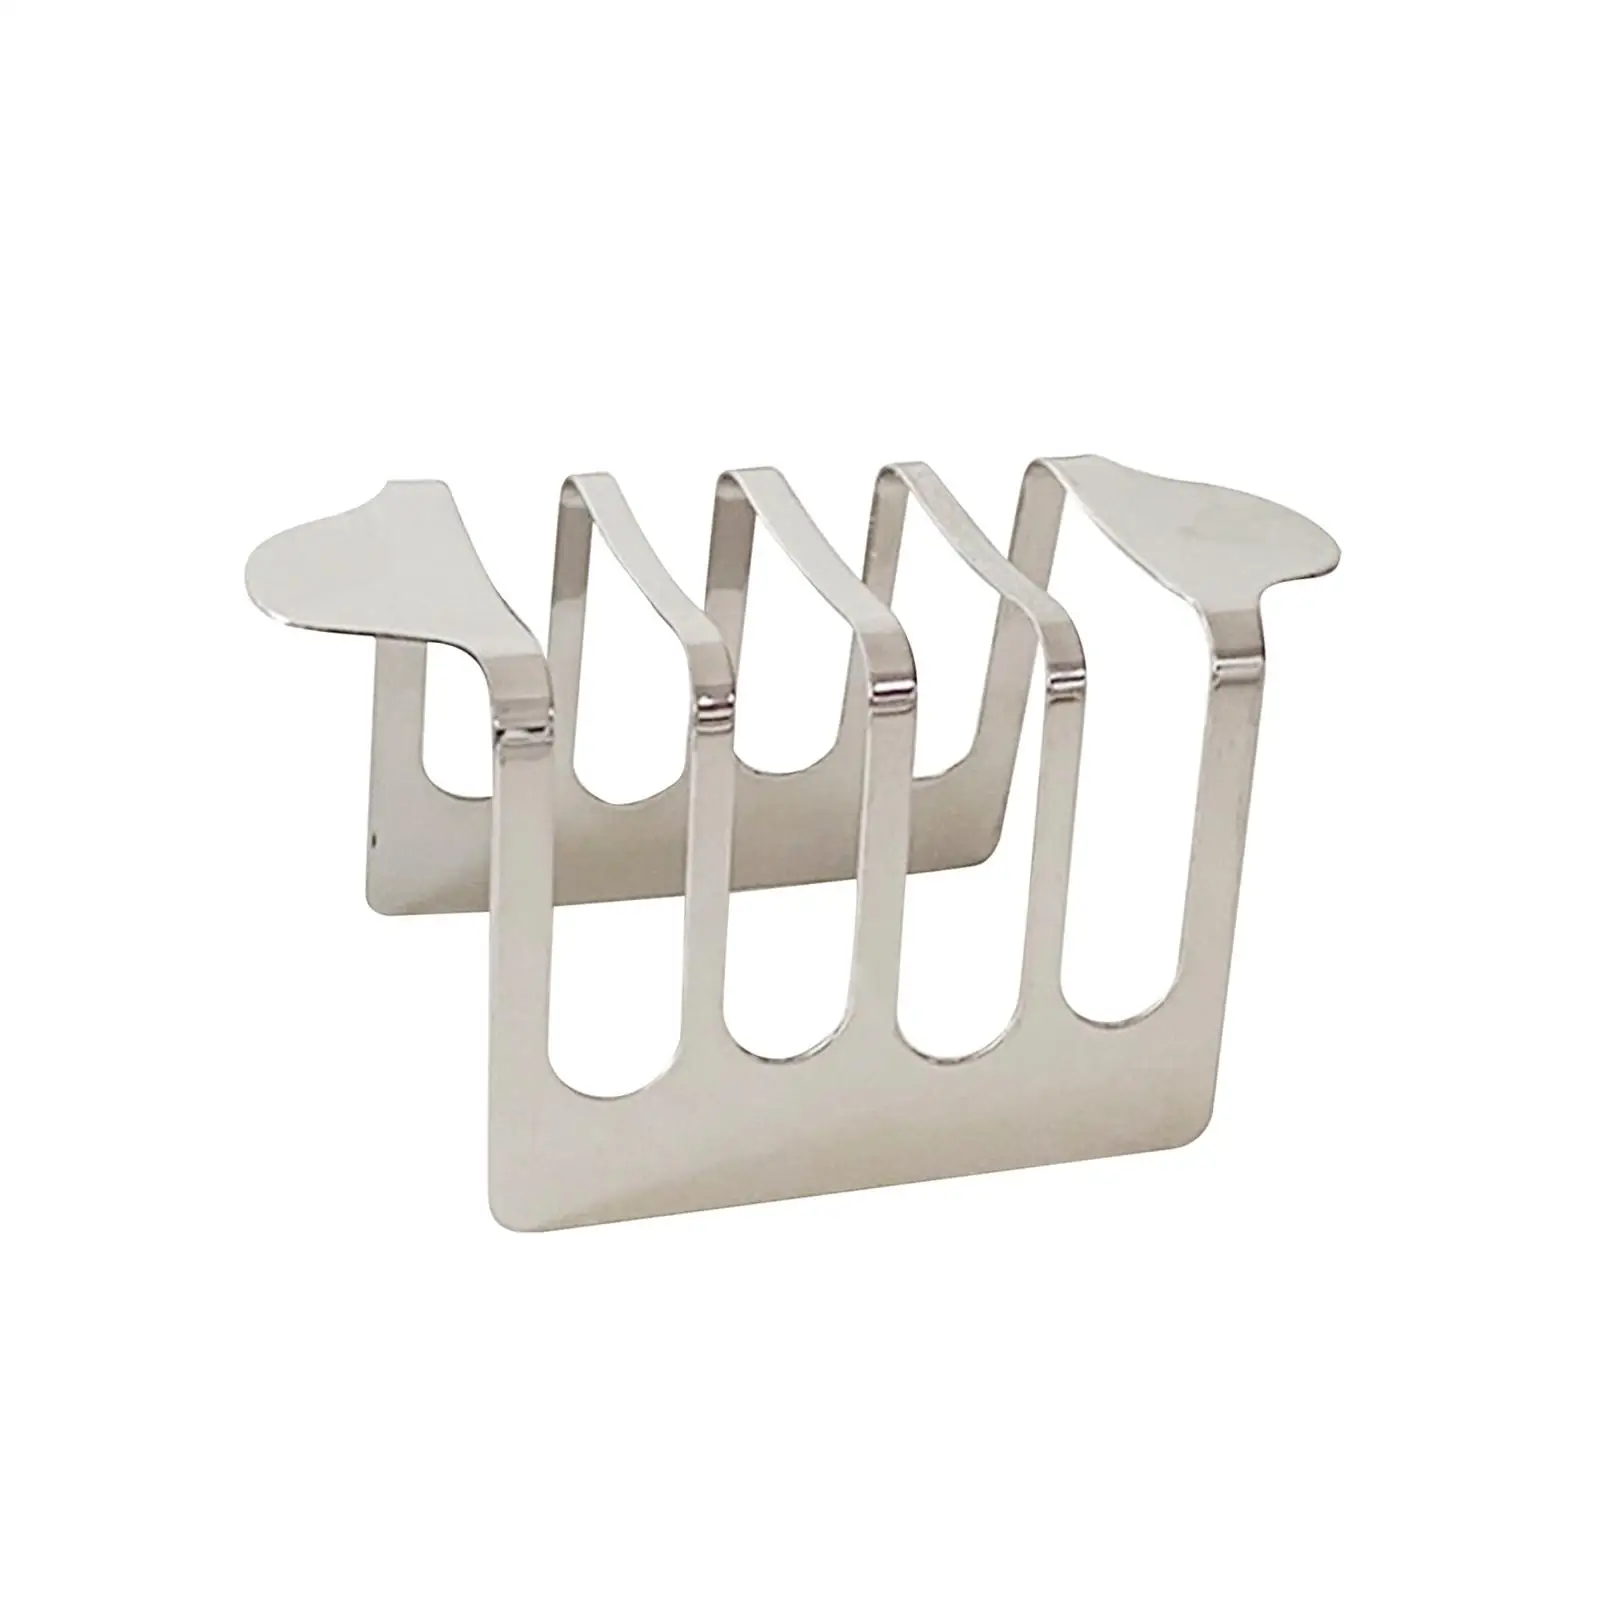 Mini Toasts Holder Kitchen Tool Storing Bread Utensil Household Food Display Stand for Restaurant Bread Hotel Pancake